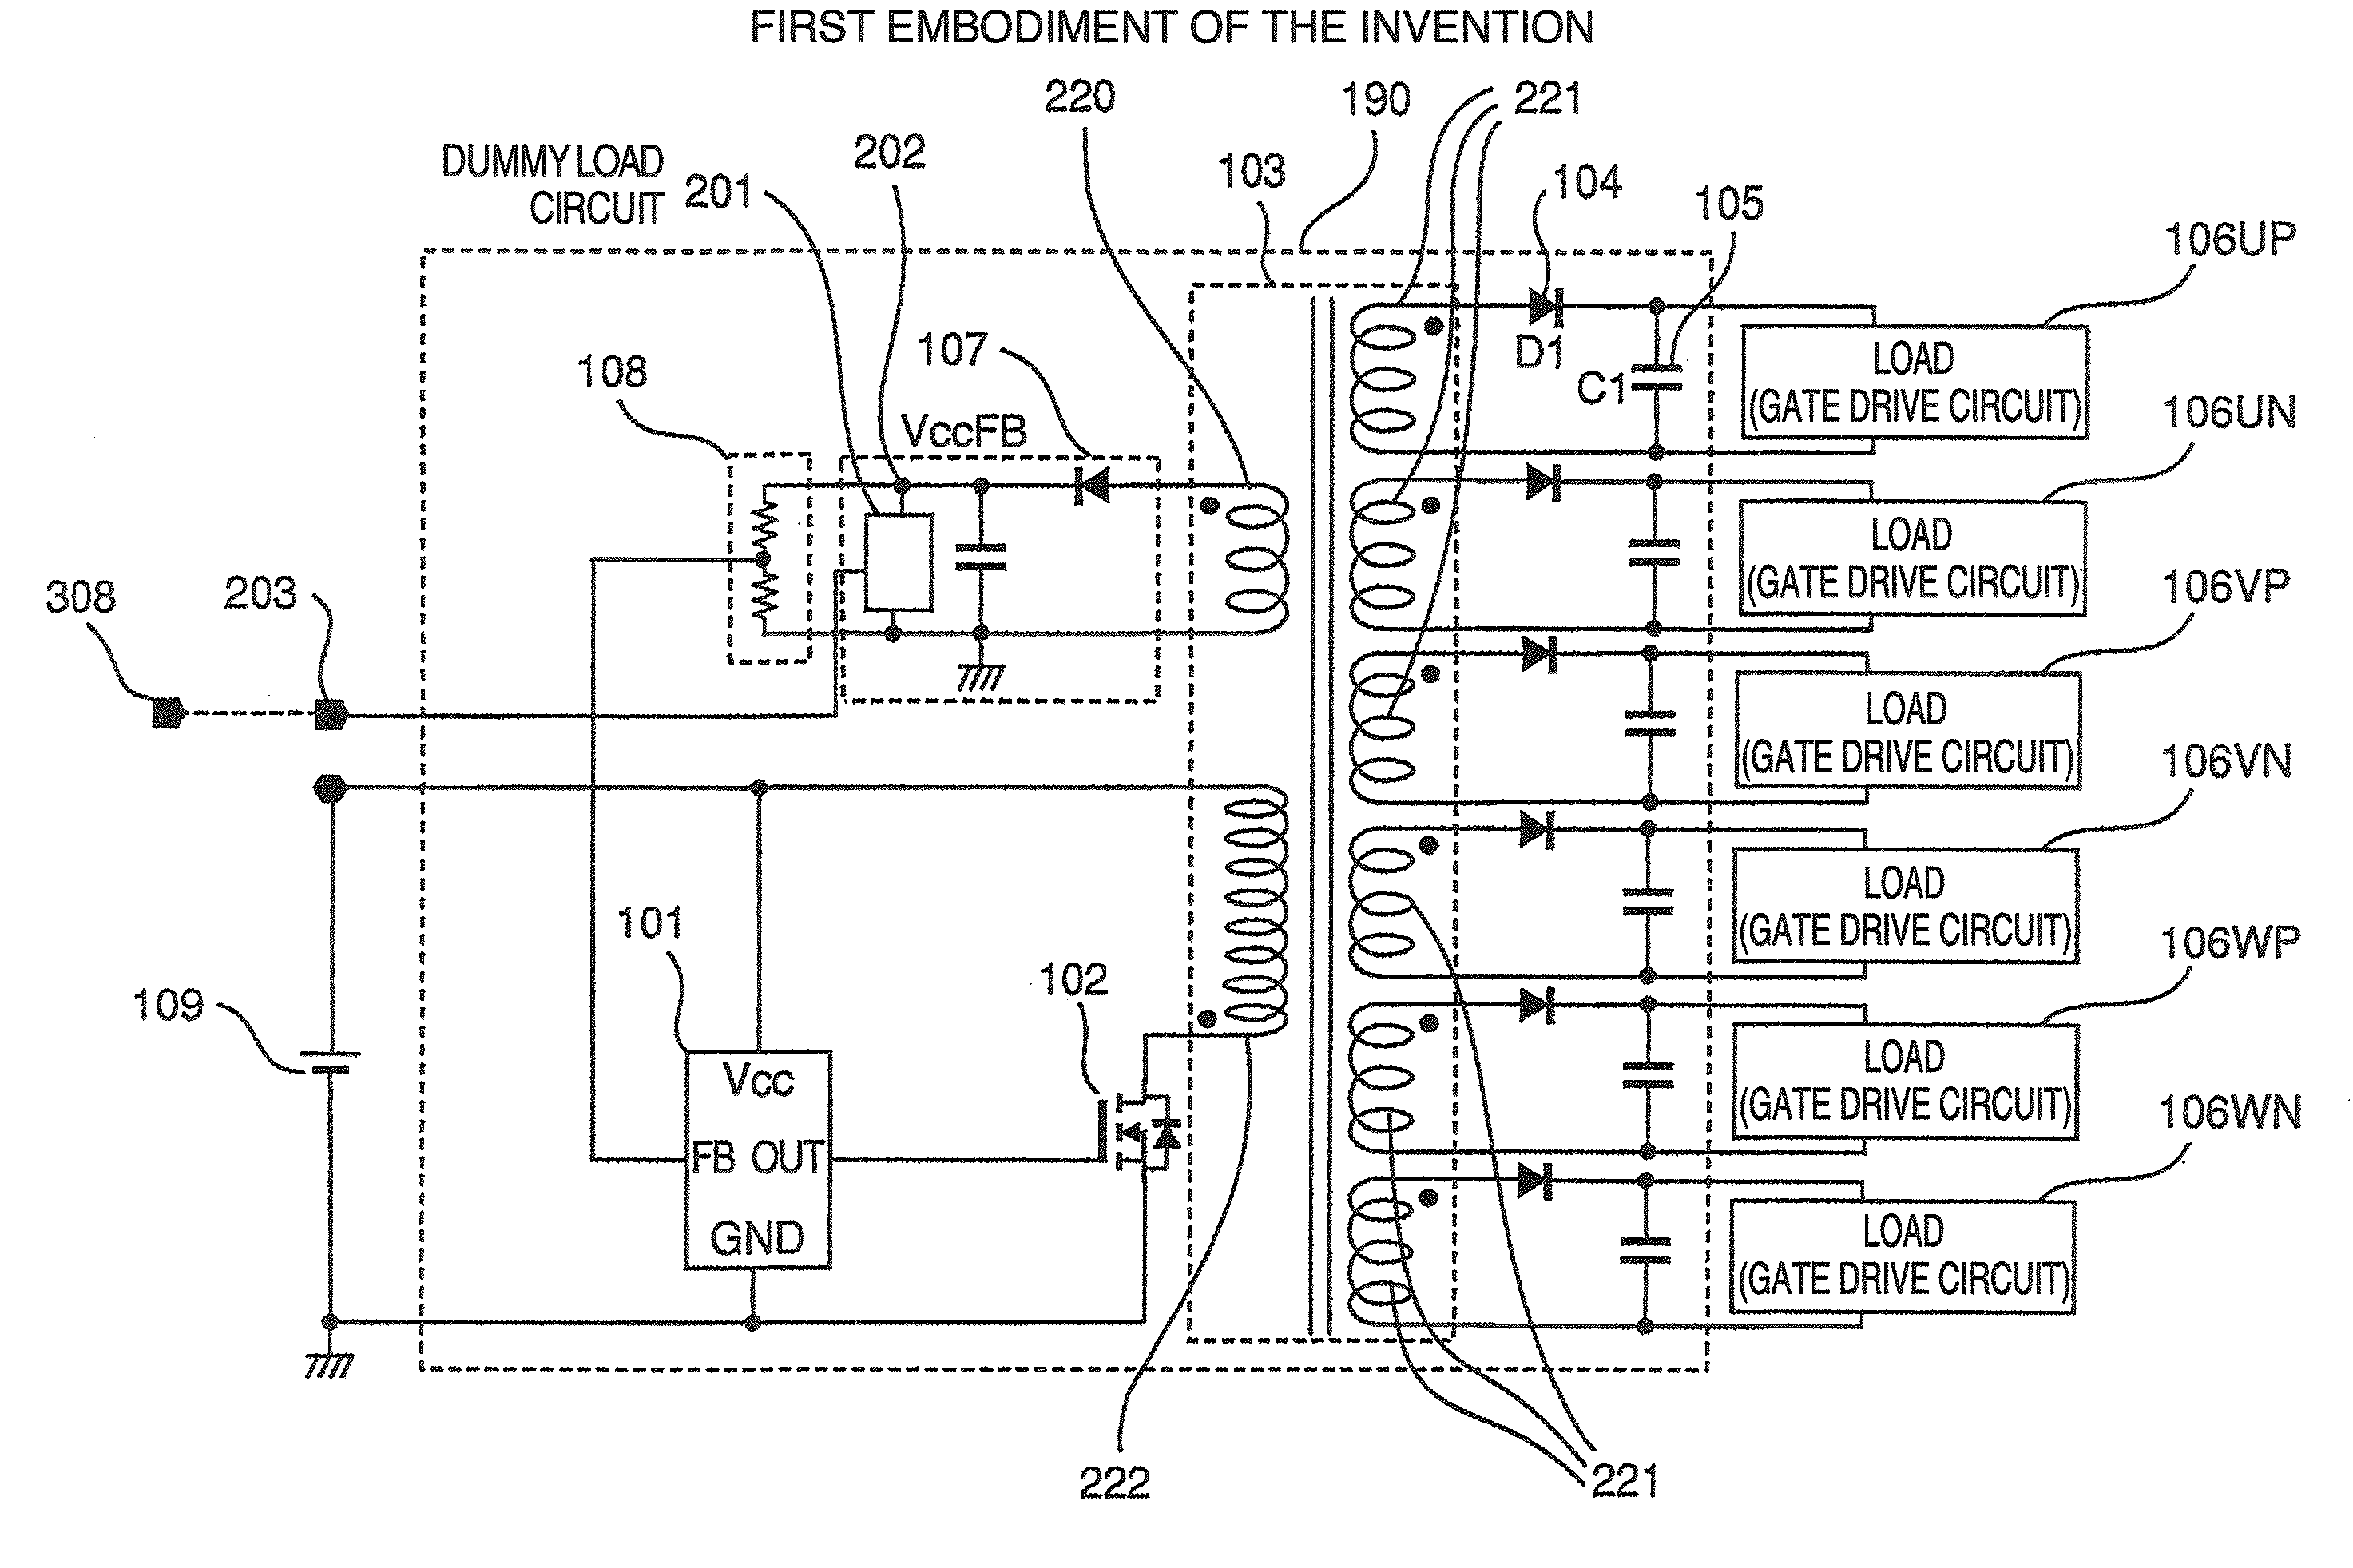 Power Supply Circuit and Power Conversion Device